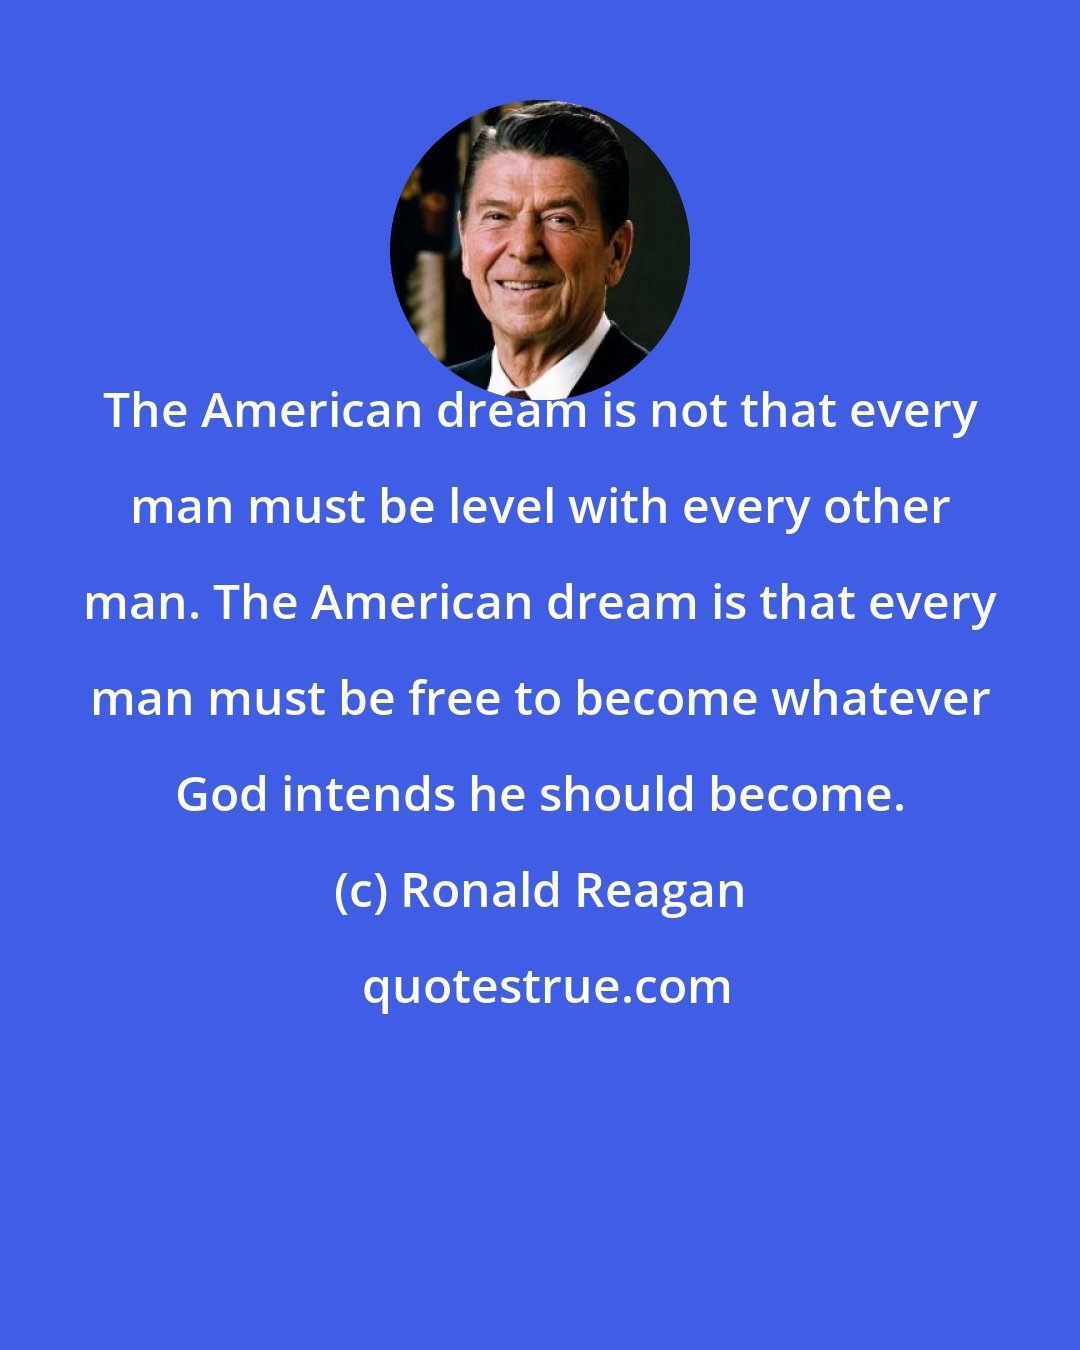 Ronald Reagan: The American dream is not that every man must be level with every other man. The American dream is that every man must be free to become whatever God intends he should become.